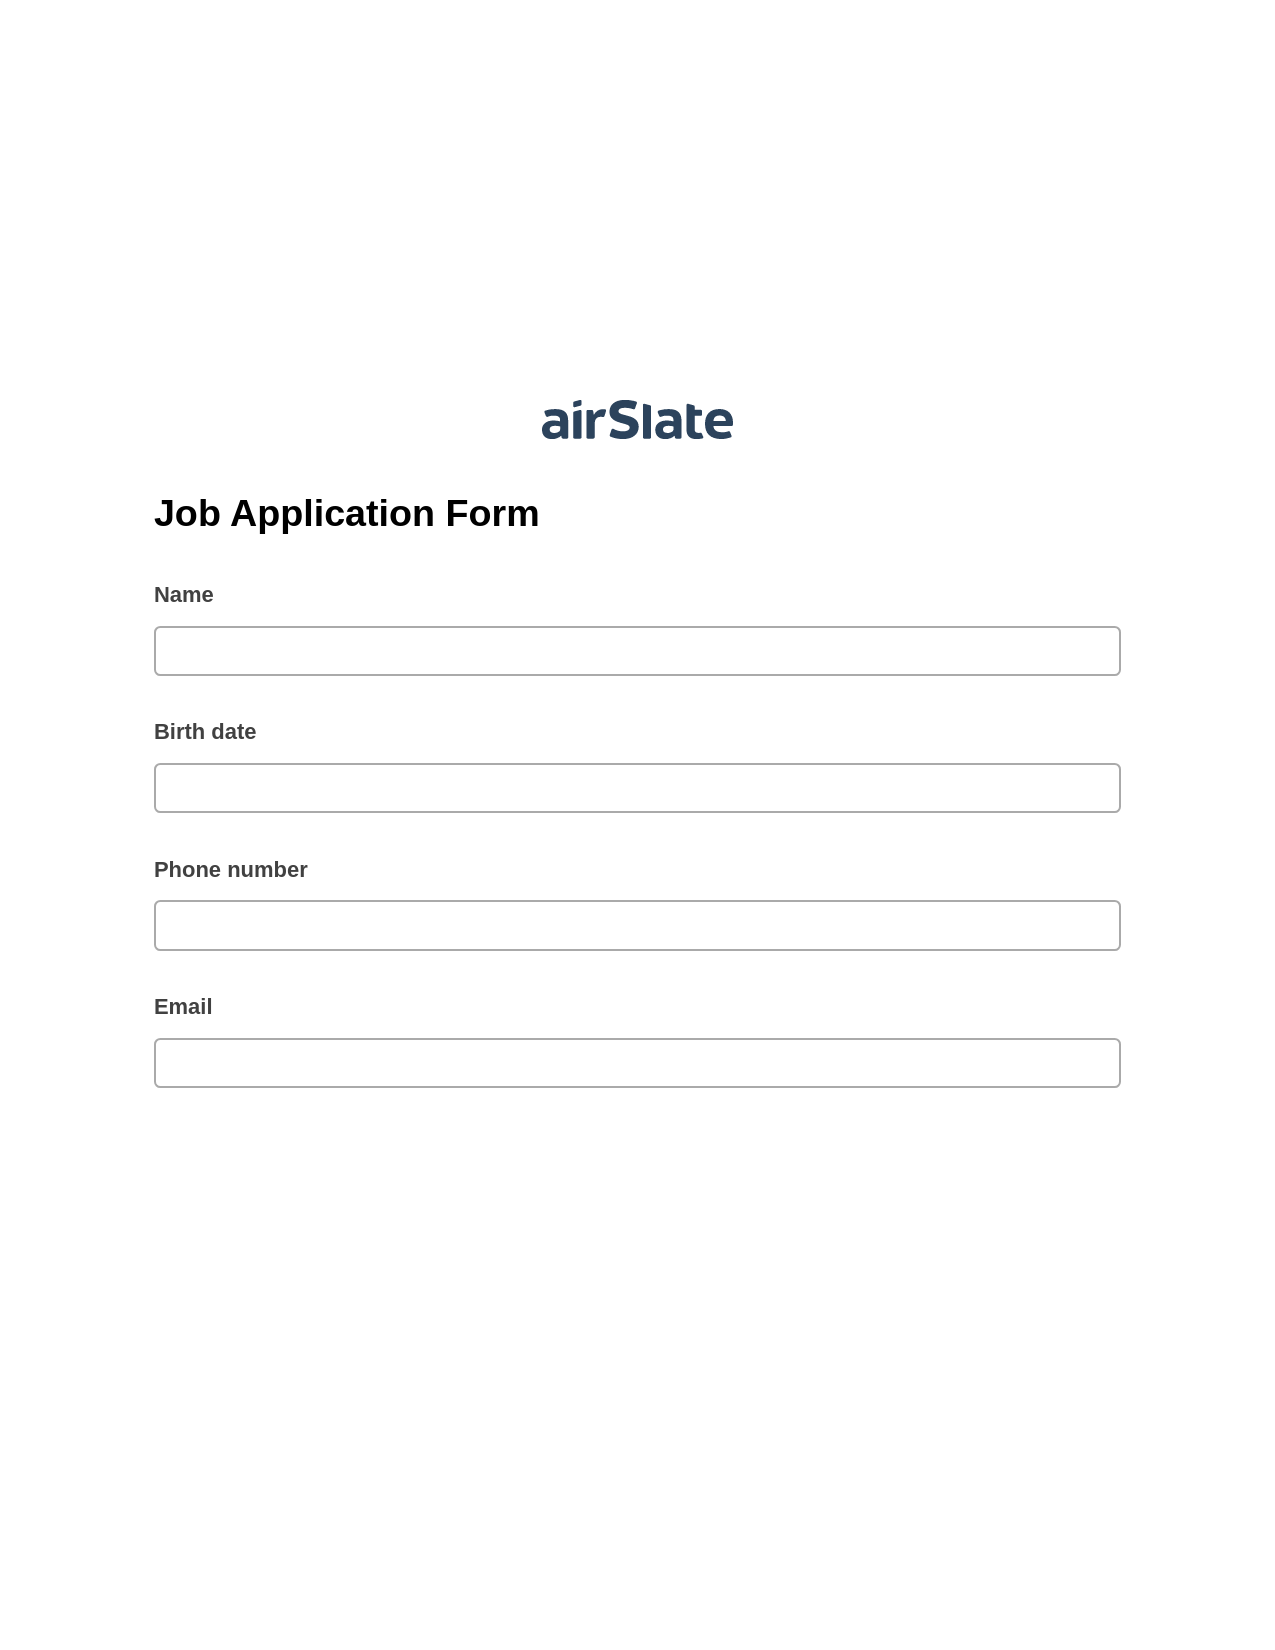 Multirole Job Application Form Pre-fill from NetSuite Records Bot, Update NetSuite Records Bot, Google Drive Bot